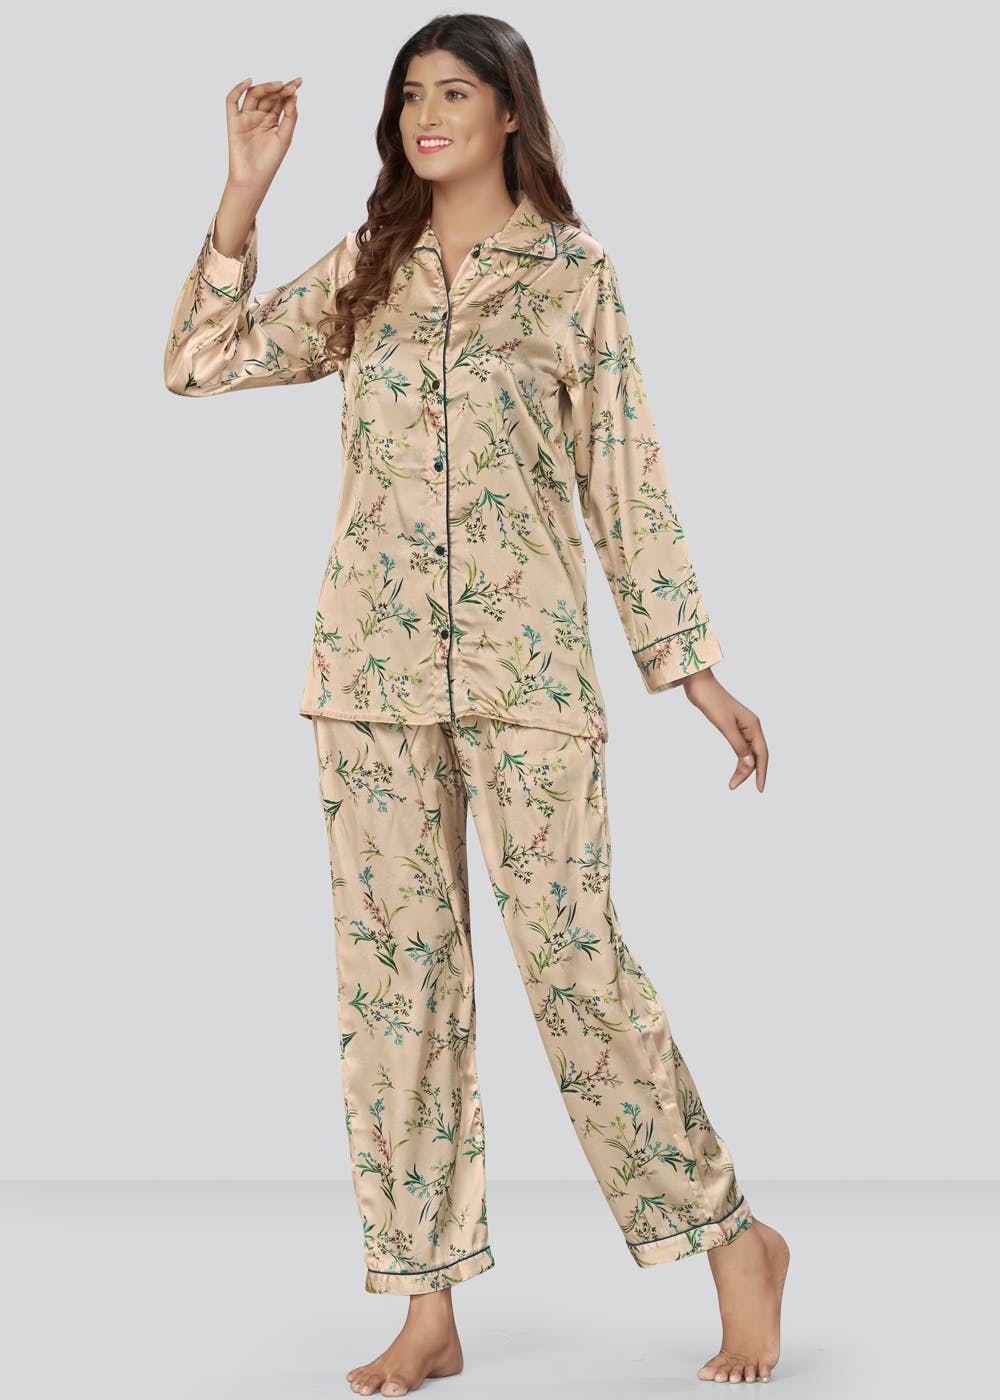 Womenity Hot Sexy Silk Ladies Sleep Wear Night Dress Nighty With Shirt And Trouser  Sleep Wear For Women And Girls Complete Sleeping Suit Price in Pakistan   View Latest Collection of Cables